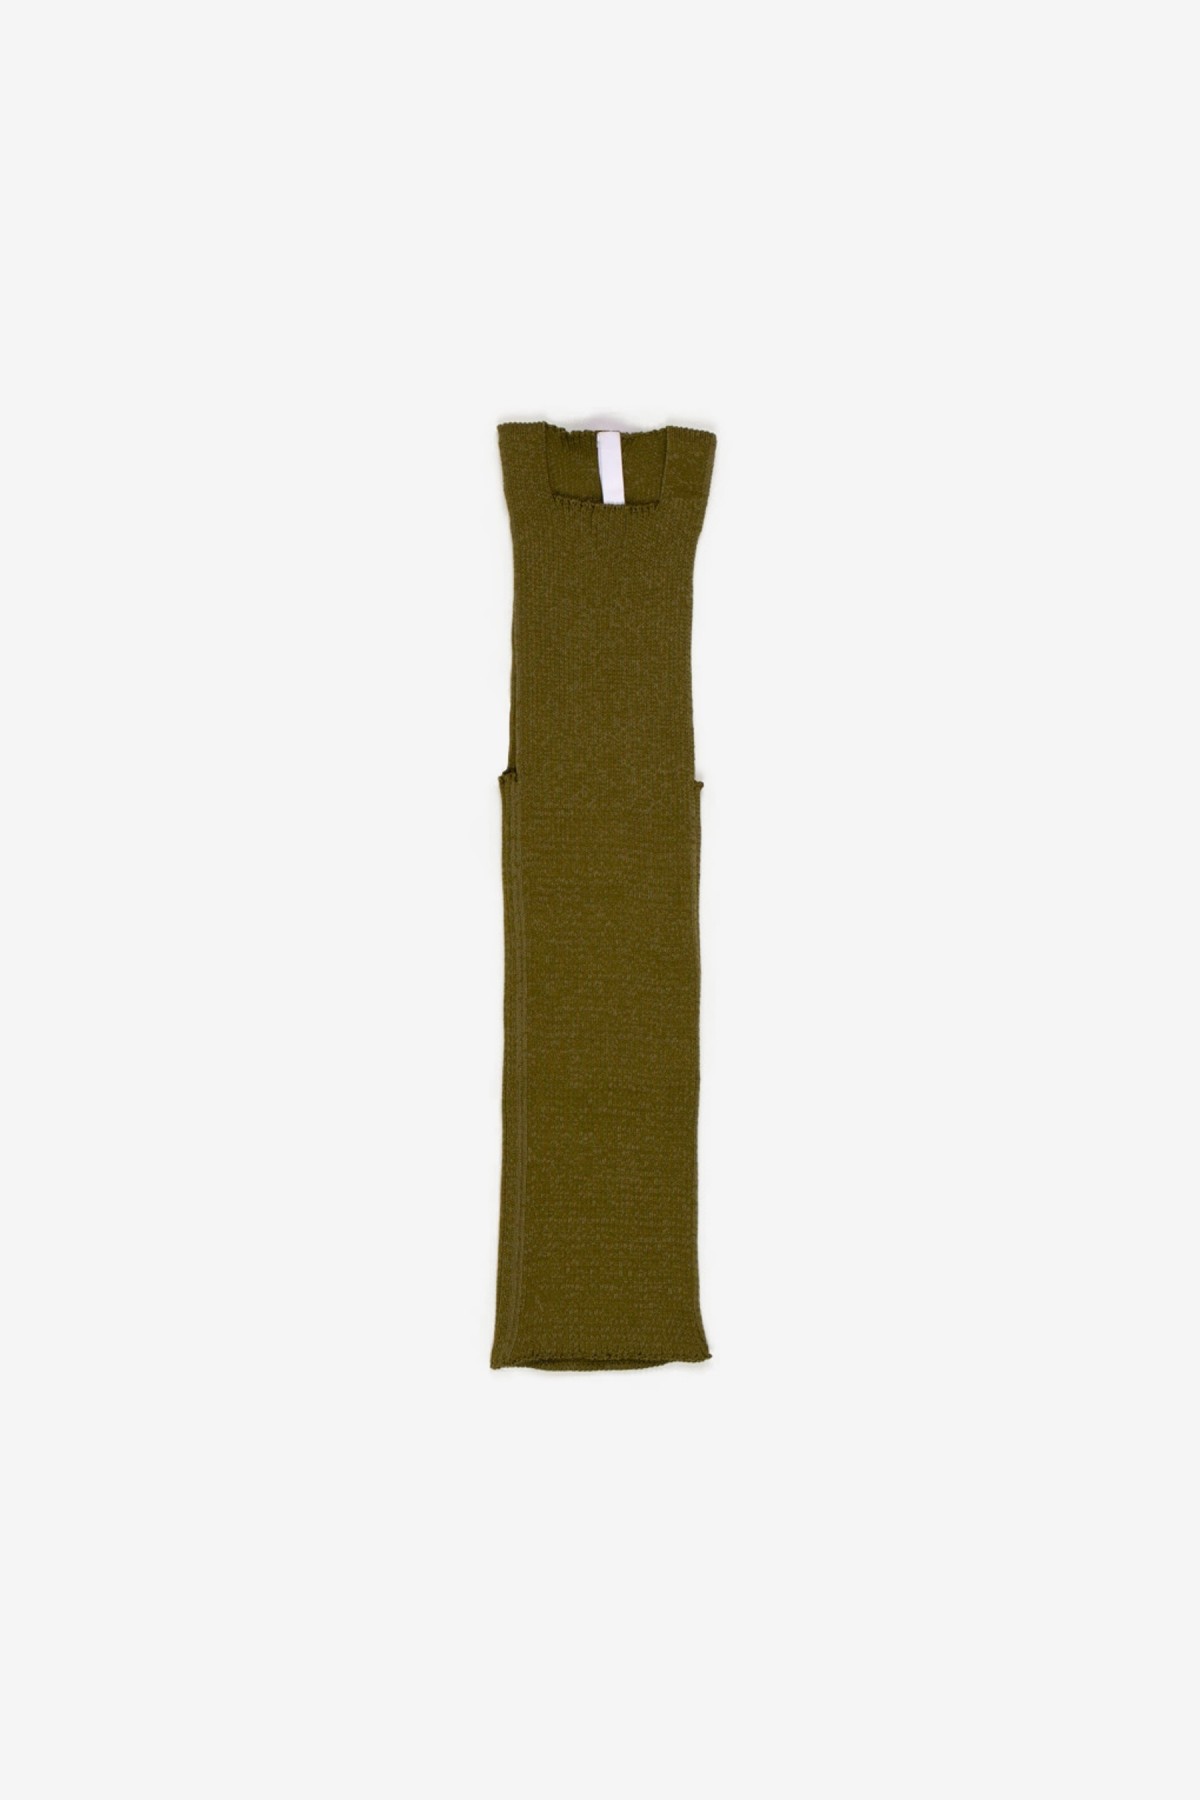 A. Roege Hove Emma High Neck Top in Moss Green